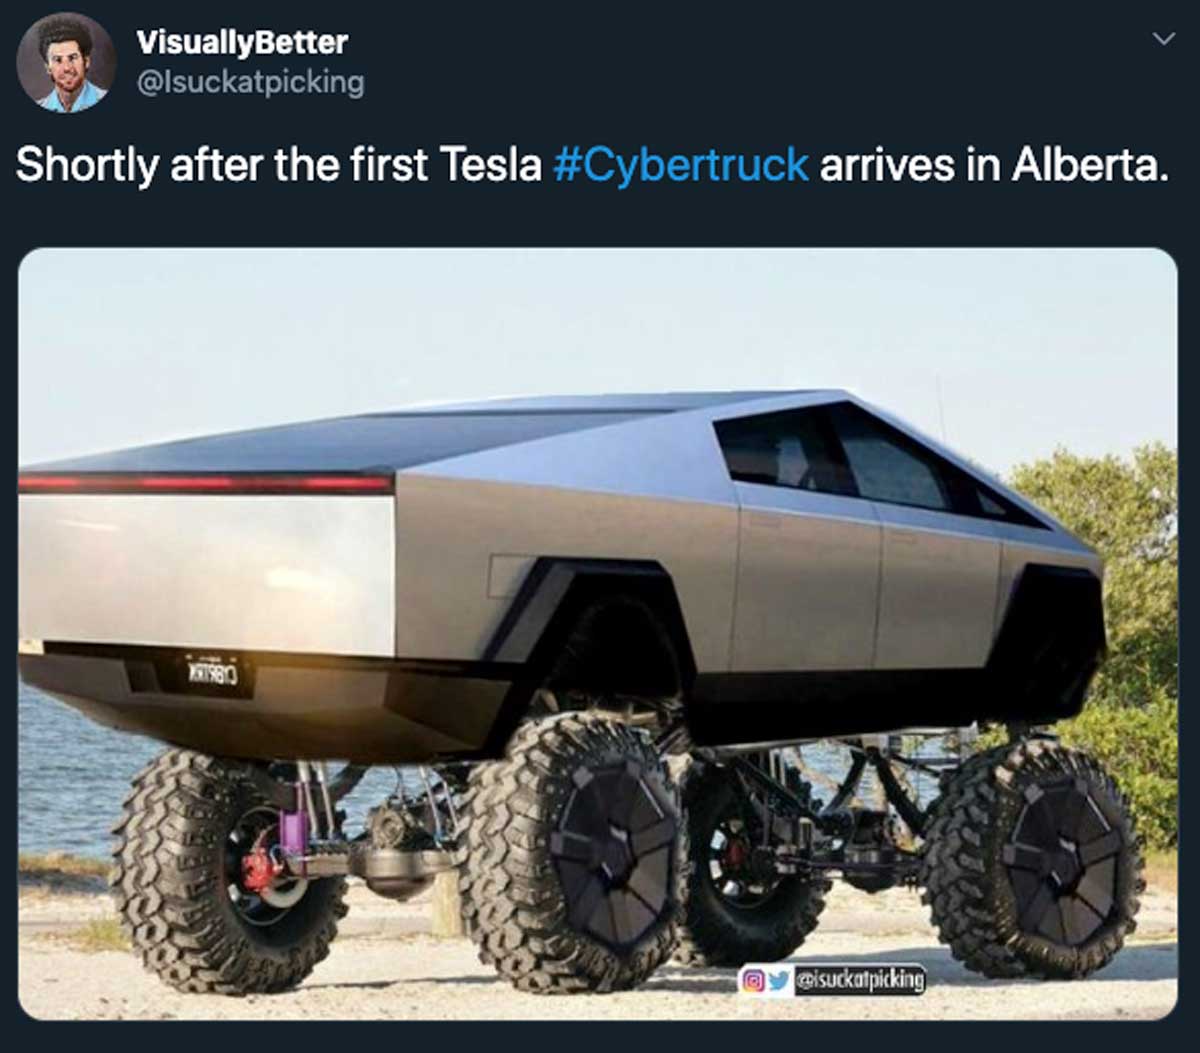 Funny tweet about the Tesla Cybertruck that shows a Cybertruck with a lift kit and the caption 'shortly after the first Tesla cybertruck arrives in alberta'